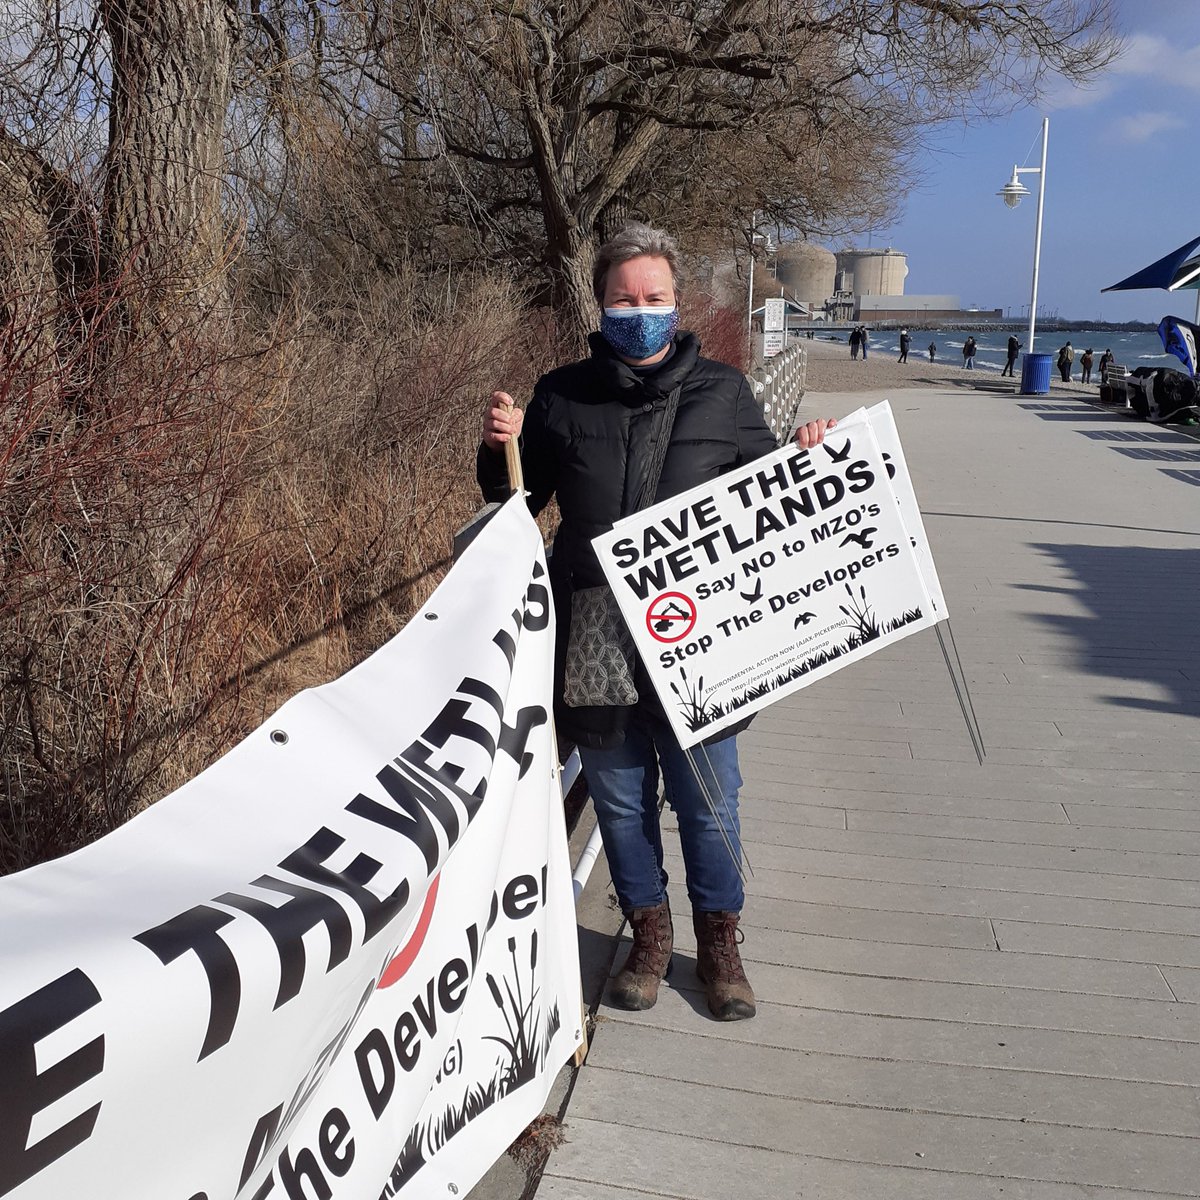 I was out trying to safe Duffins Creek Wetland last weekend, hope to see you at the March on Saturday! #saveontariowetlands